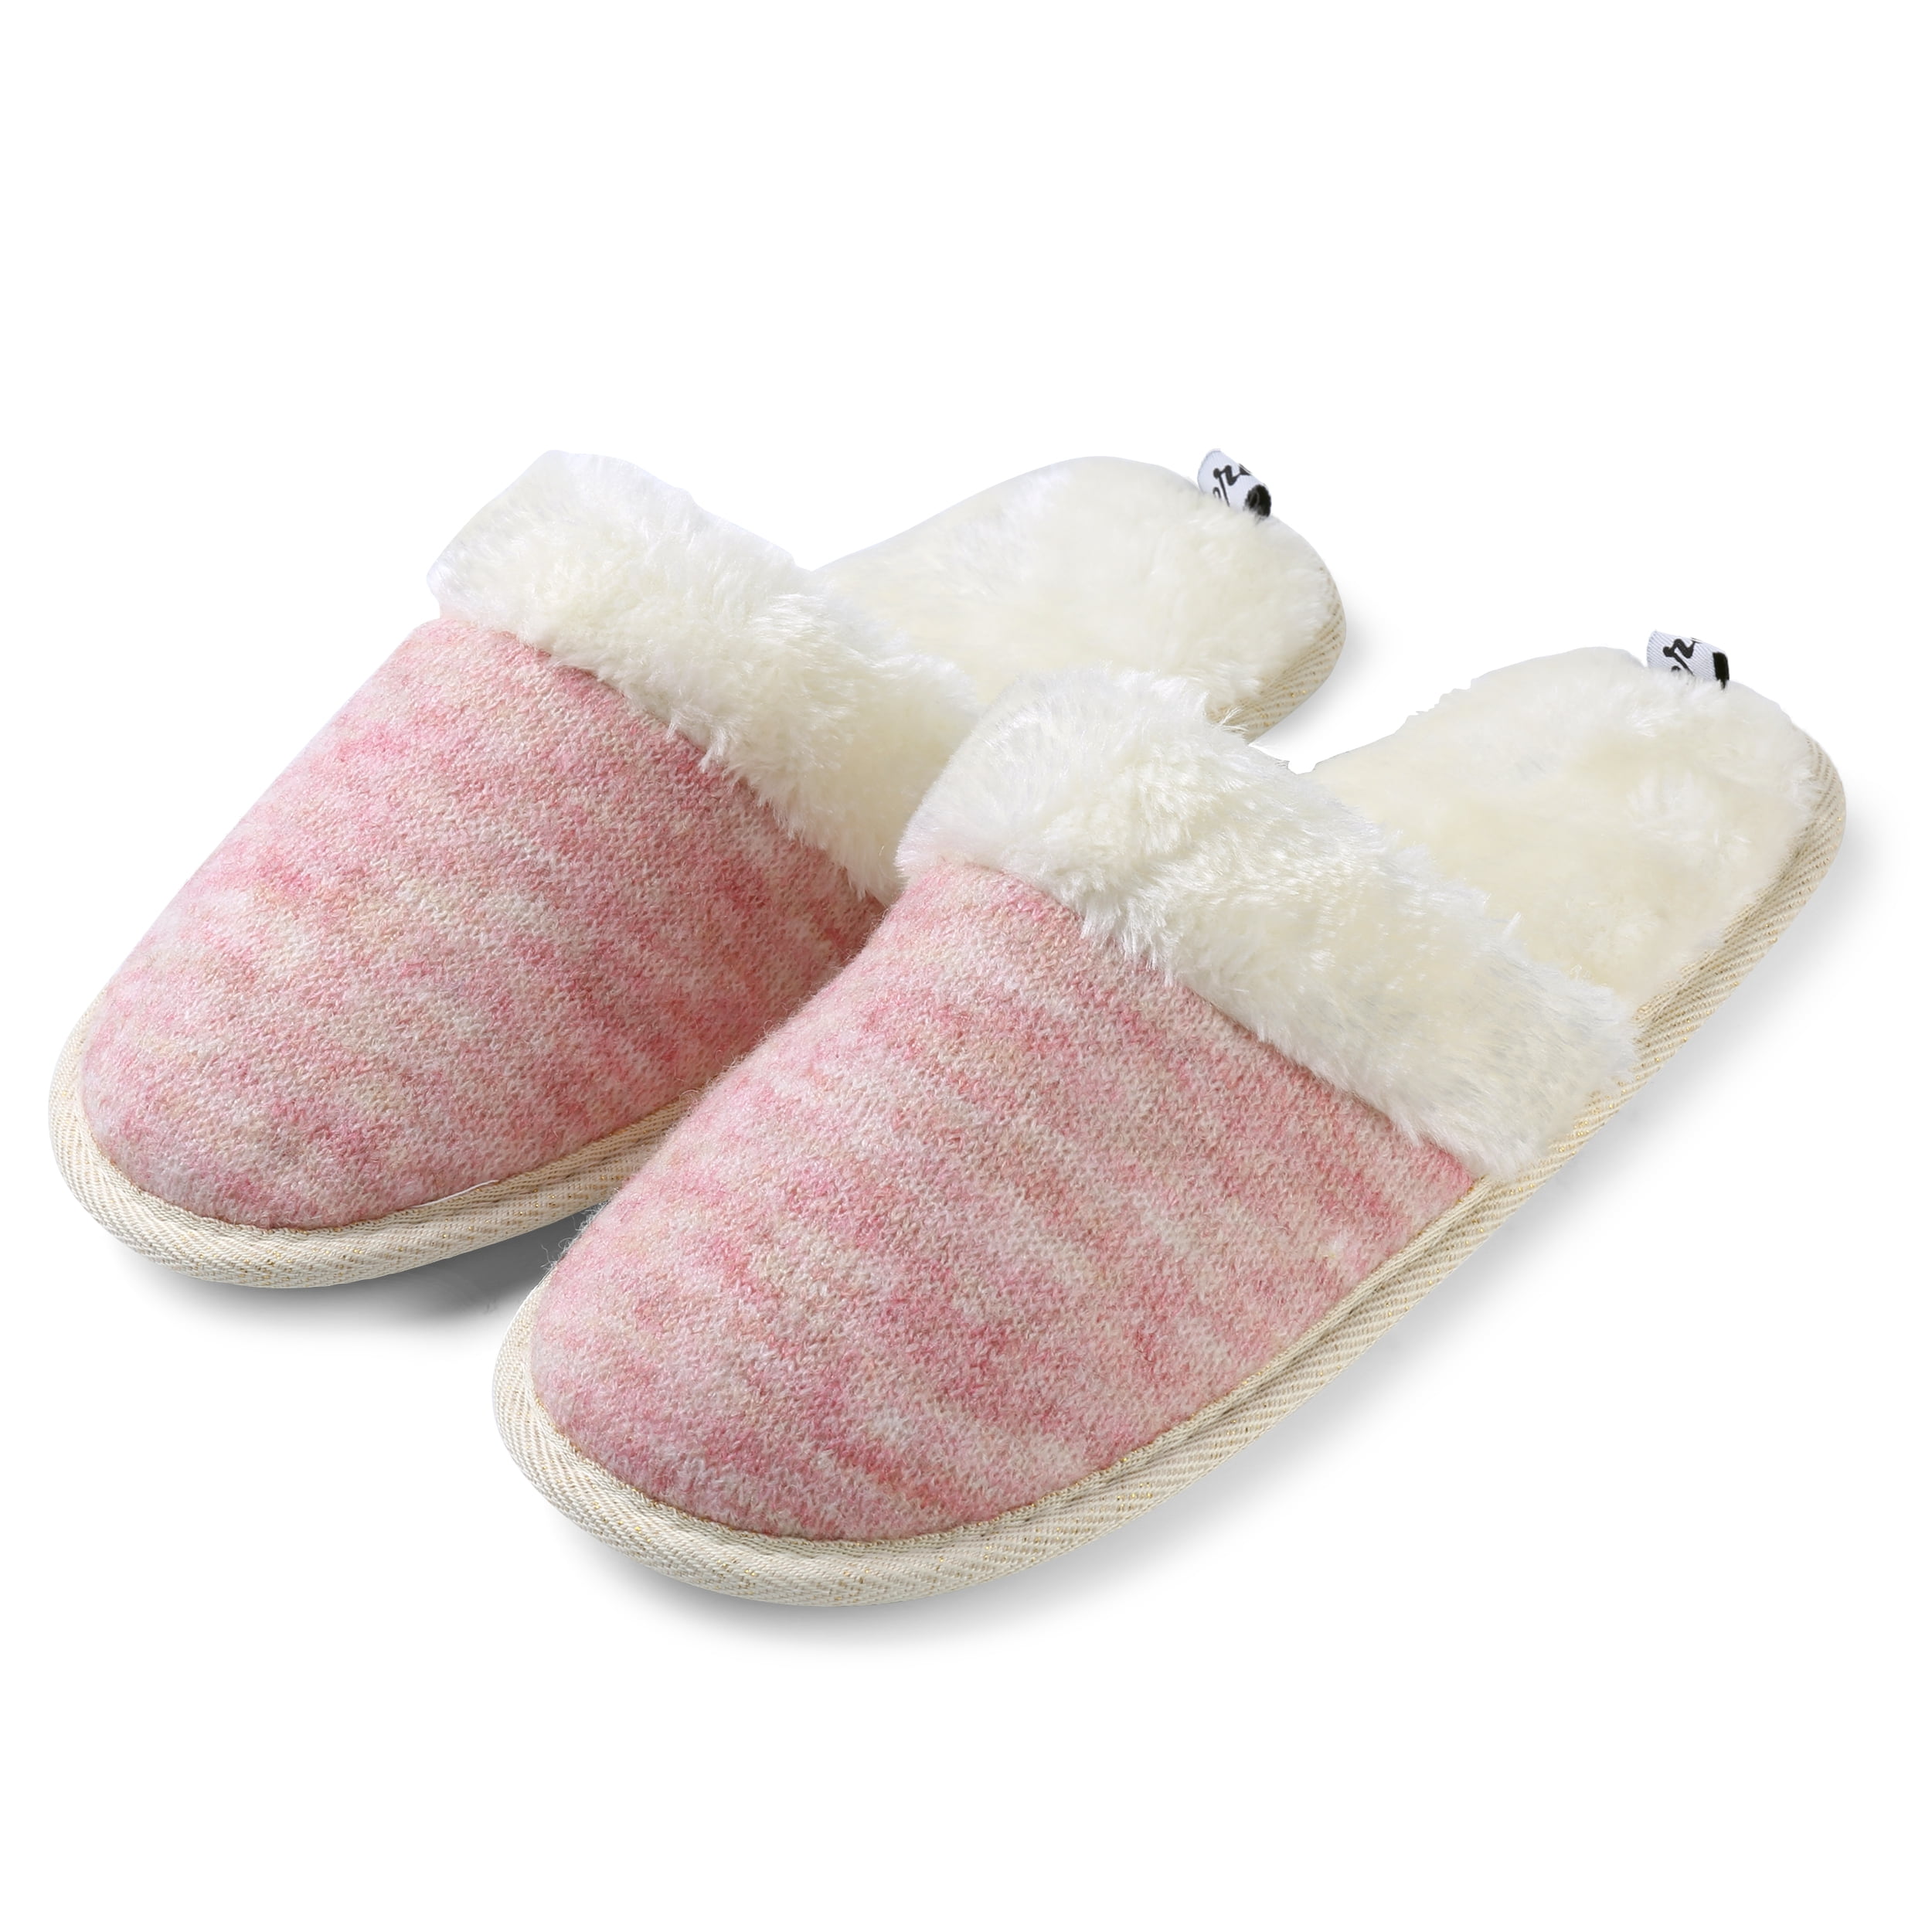 Women's Warm And Soft Plush Jade Twill Slippers with No-Slip Rubber ...